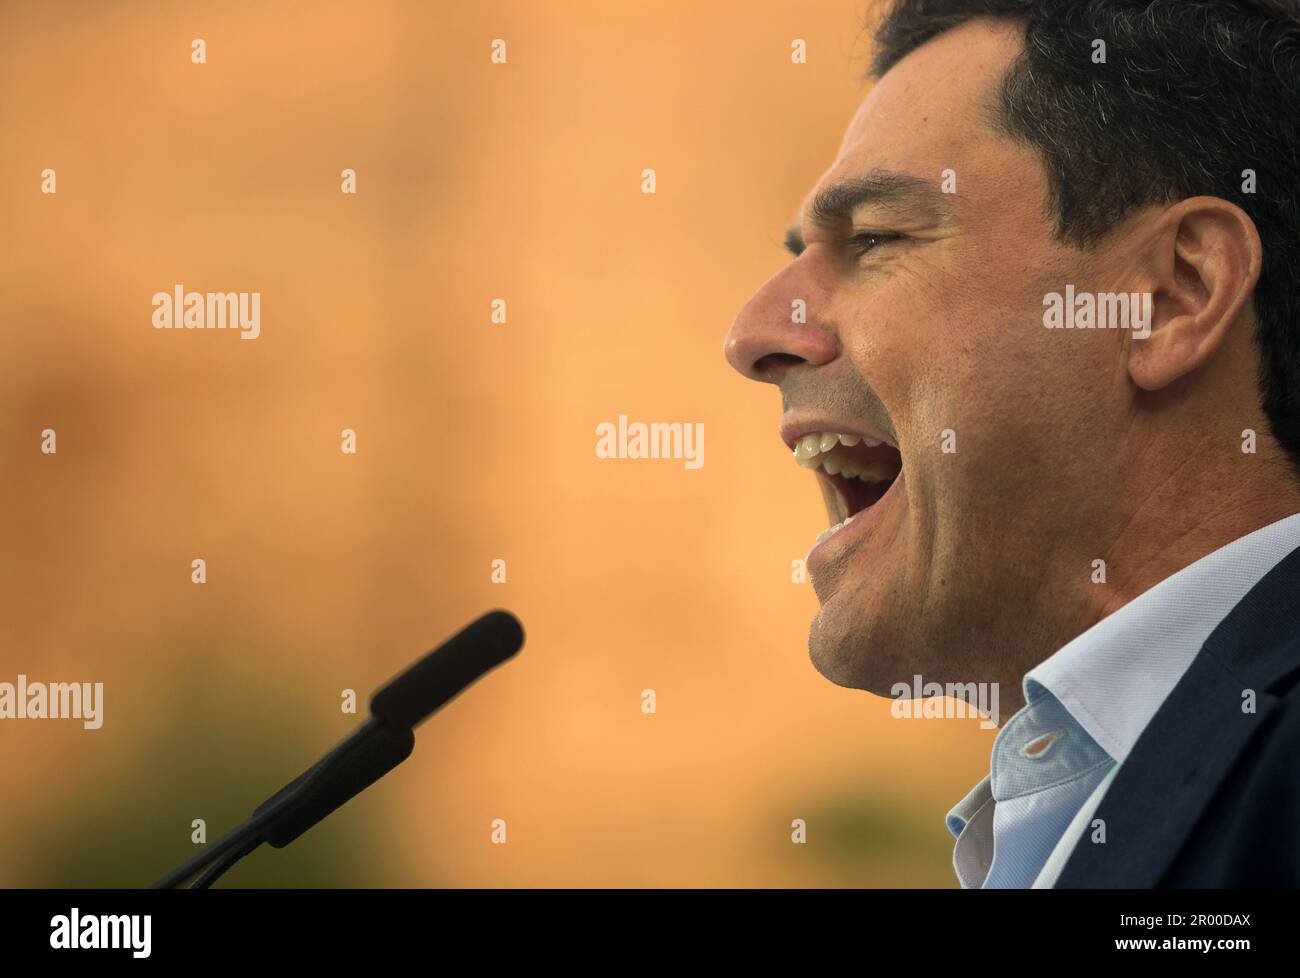 Malaga, Spain. 05th May, 2023. Andalusian regional president Juanma Moreno is seen delivering a speech as he takes part during an electoral pre-campaign event. The president of the Spanish Popular Party, Alberto Nunez Feijoo, has begun a tour of pre-election events in several cities across the country to support the Popular Party's candidates for the upcoming municipal elections. The results of the municipal elections on May 28th could influence the vote in the Spanish general elections at the end of the year. Credit: SOPA Images Limited/Alamy Live News Stock Photo